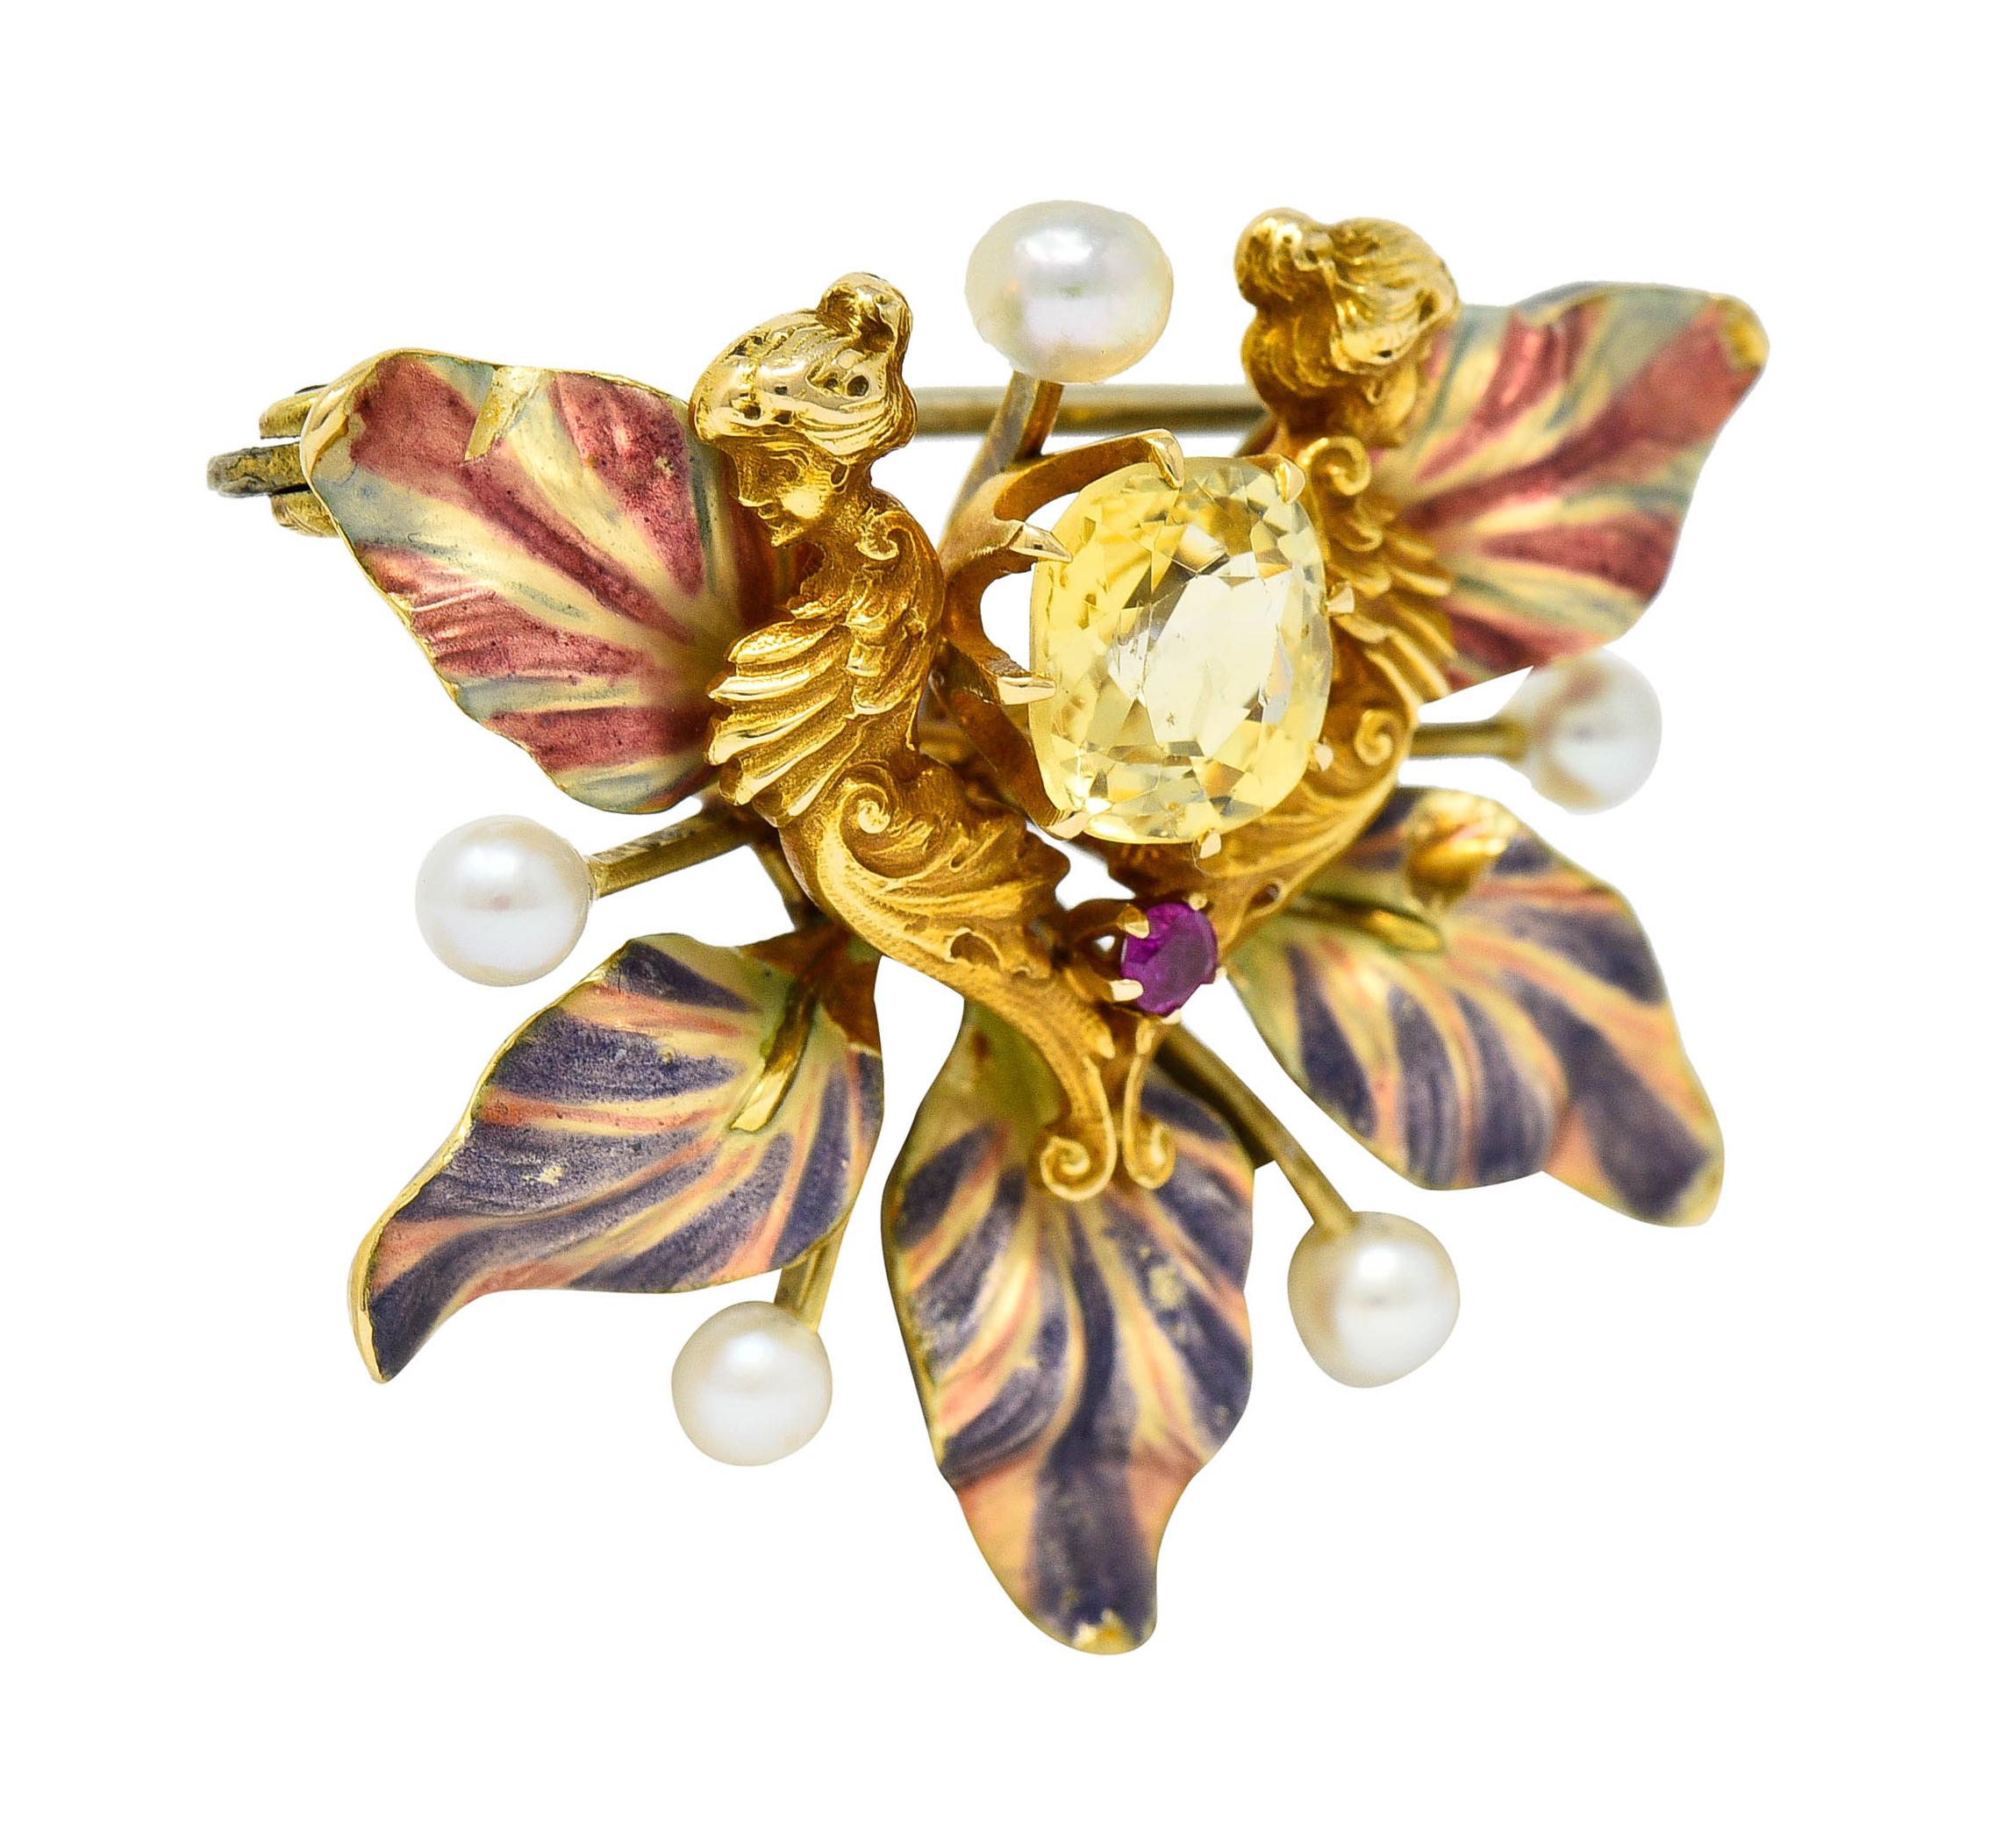 Brooch is ornately rendered as two mirrored womanly figures with whiplashed details surrounded by undulating petals

Petals are glossed with pink and purple enamel that exhibits some loss - consistent with age, wear, and use

Centering a cushion cut